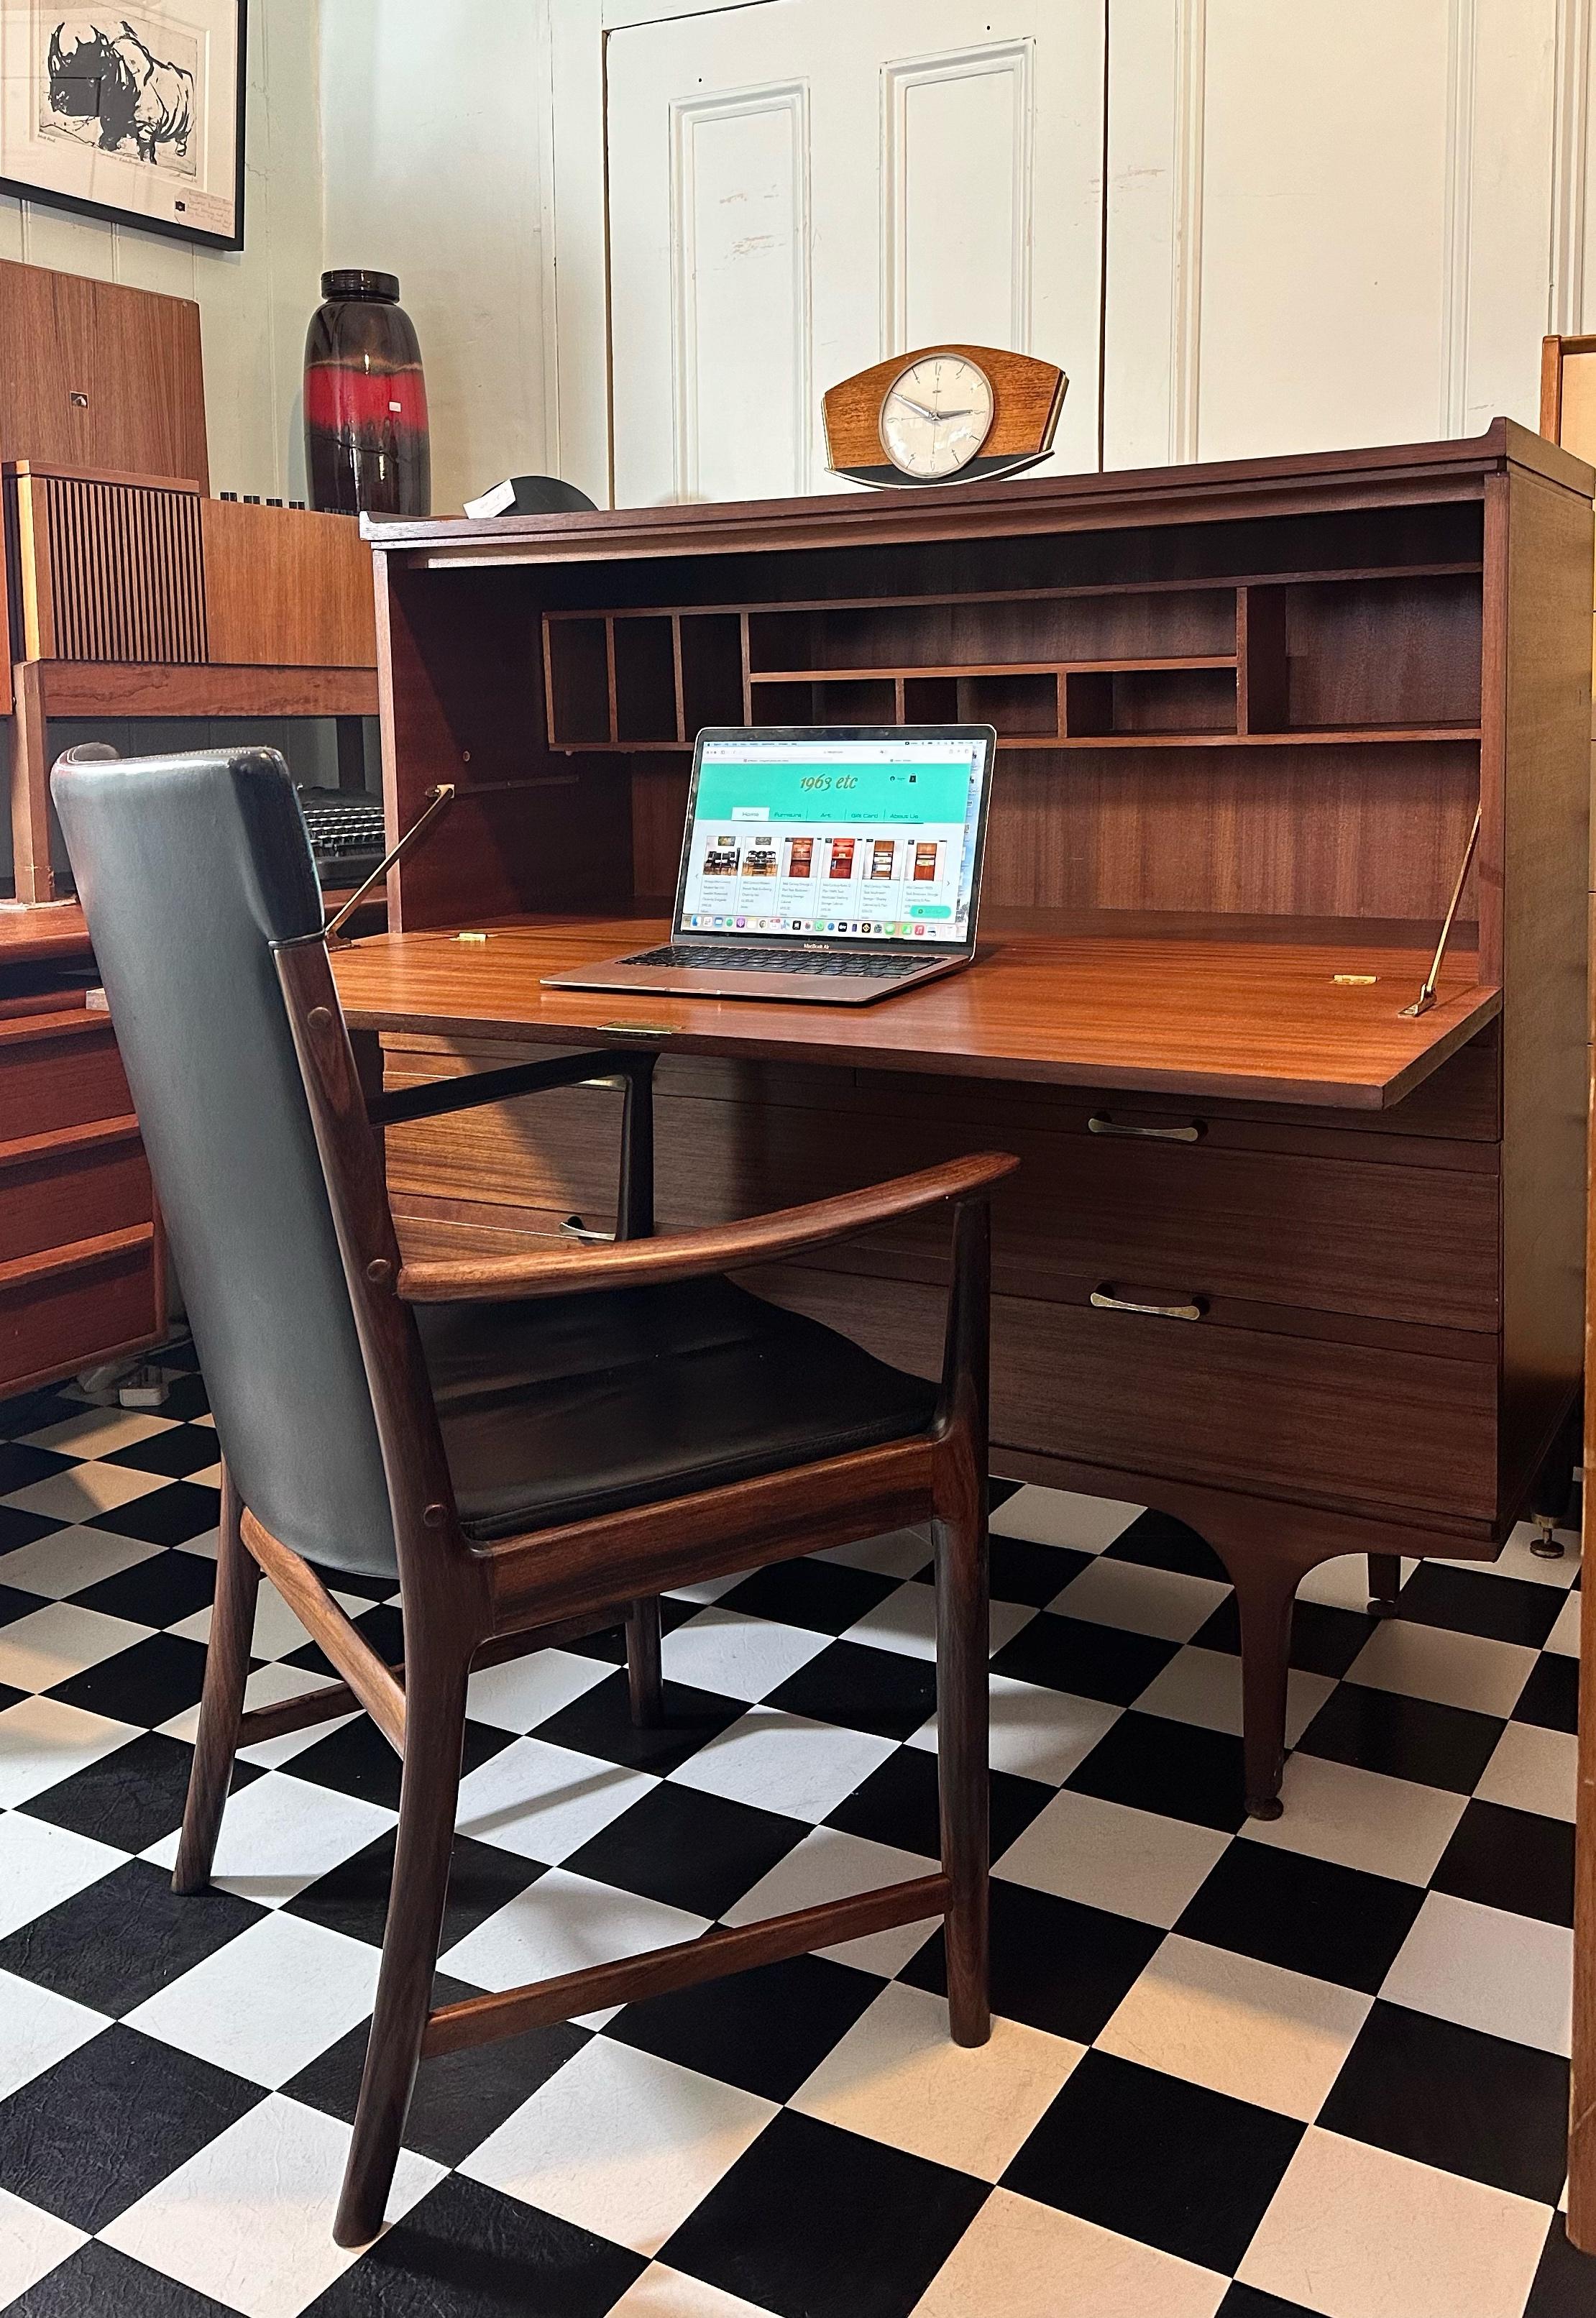 We’re happy to provide our own competitive shipping quotes with trusted couriers. Please message us with your postcode for a more accurate price. Thank you.

Beautiful vintage teak chest of drawers / writing desk / bureau by Meredew. Very compact